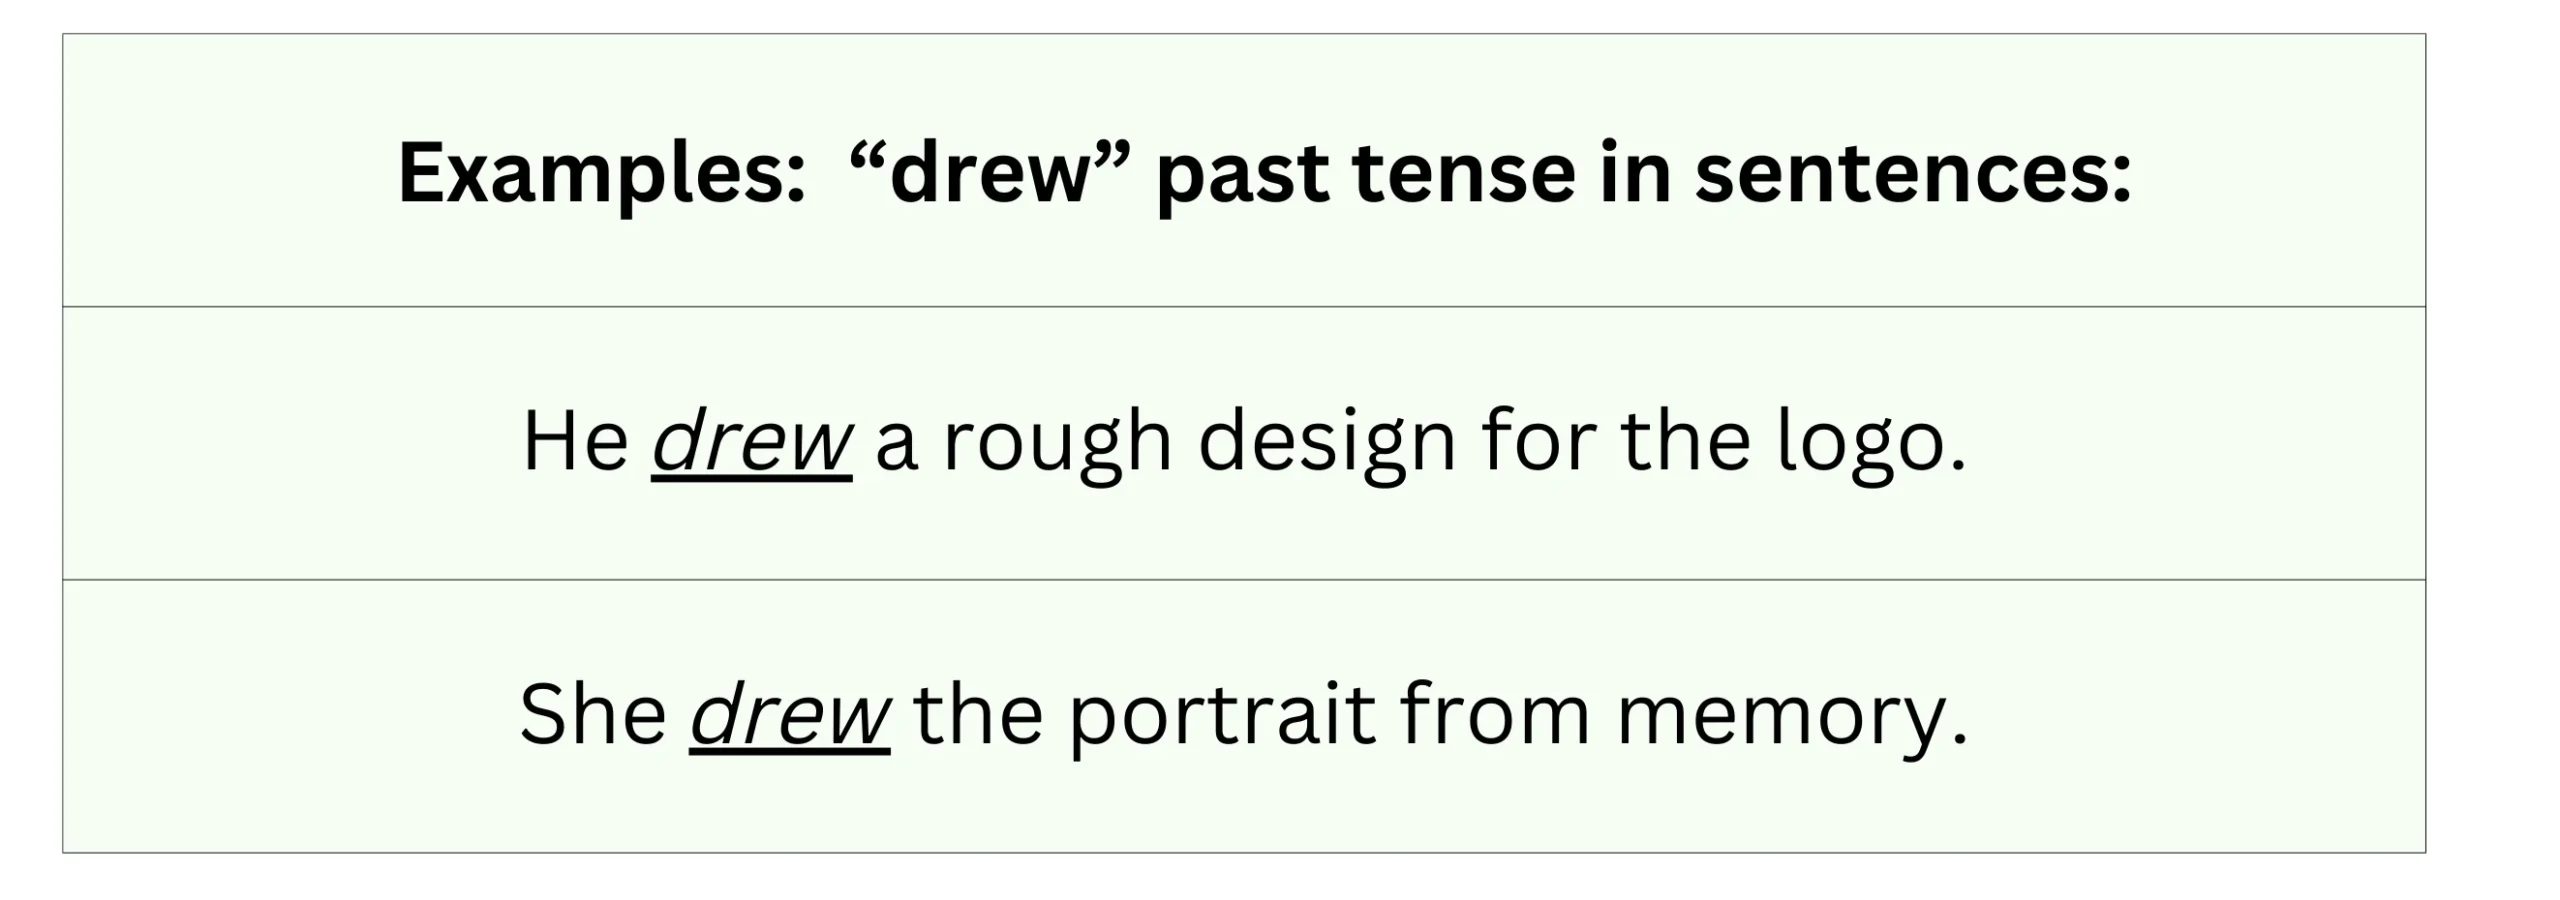 Mastering English Grammar: The Correct Past Tense of Draw Explained -  ESLBUZZ